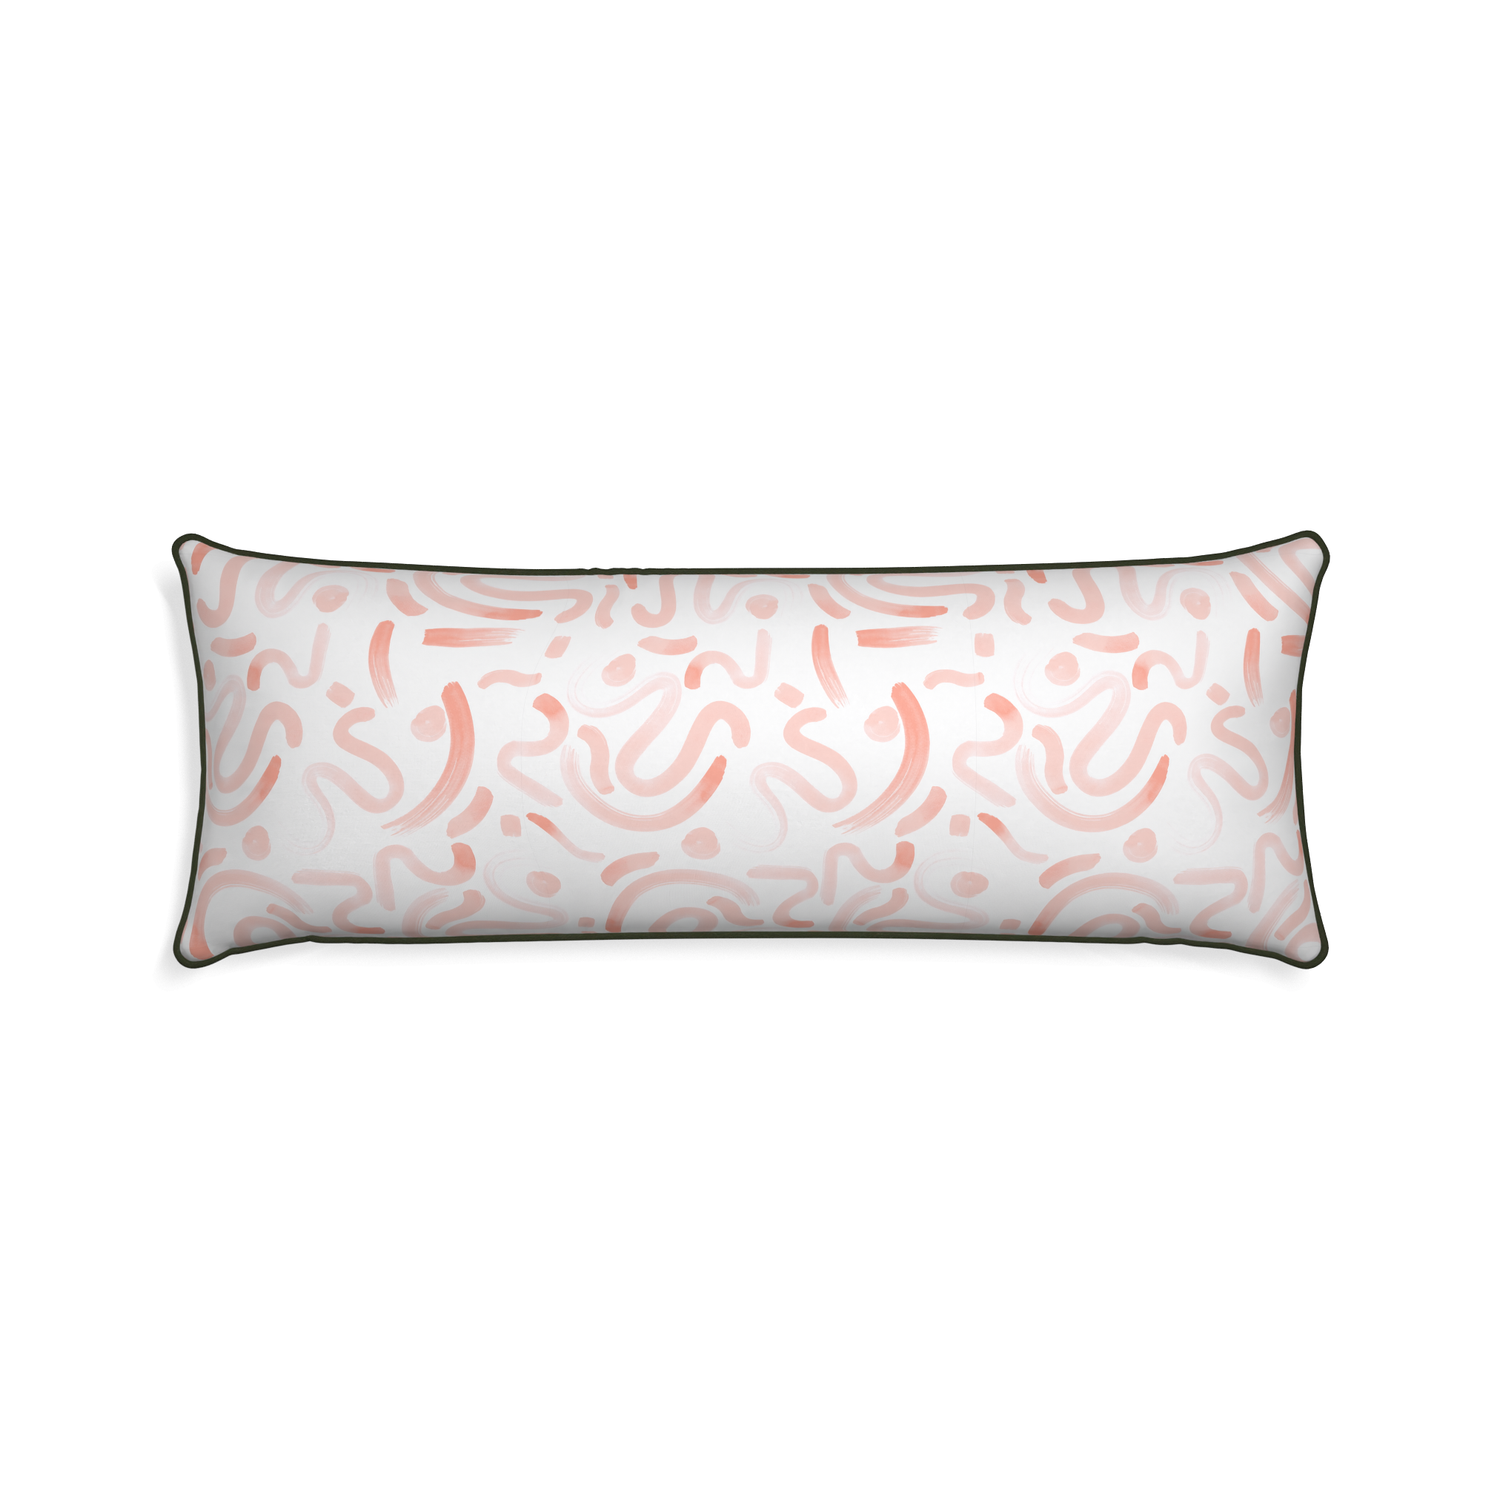 Xl-lumbar hockney pink custom pink graphicpillow with f piping on white background